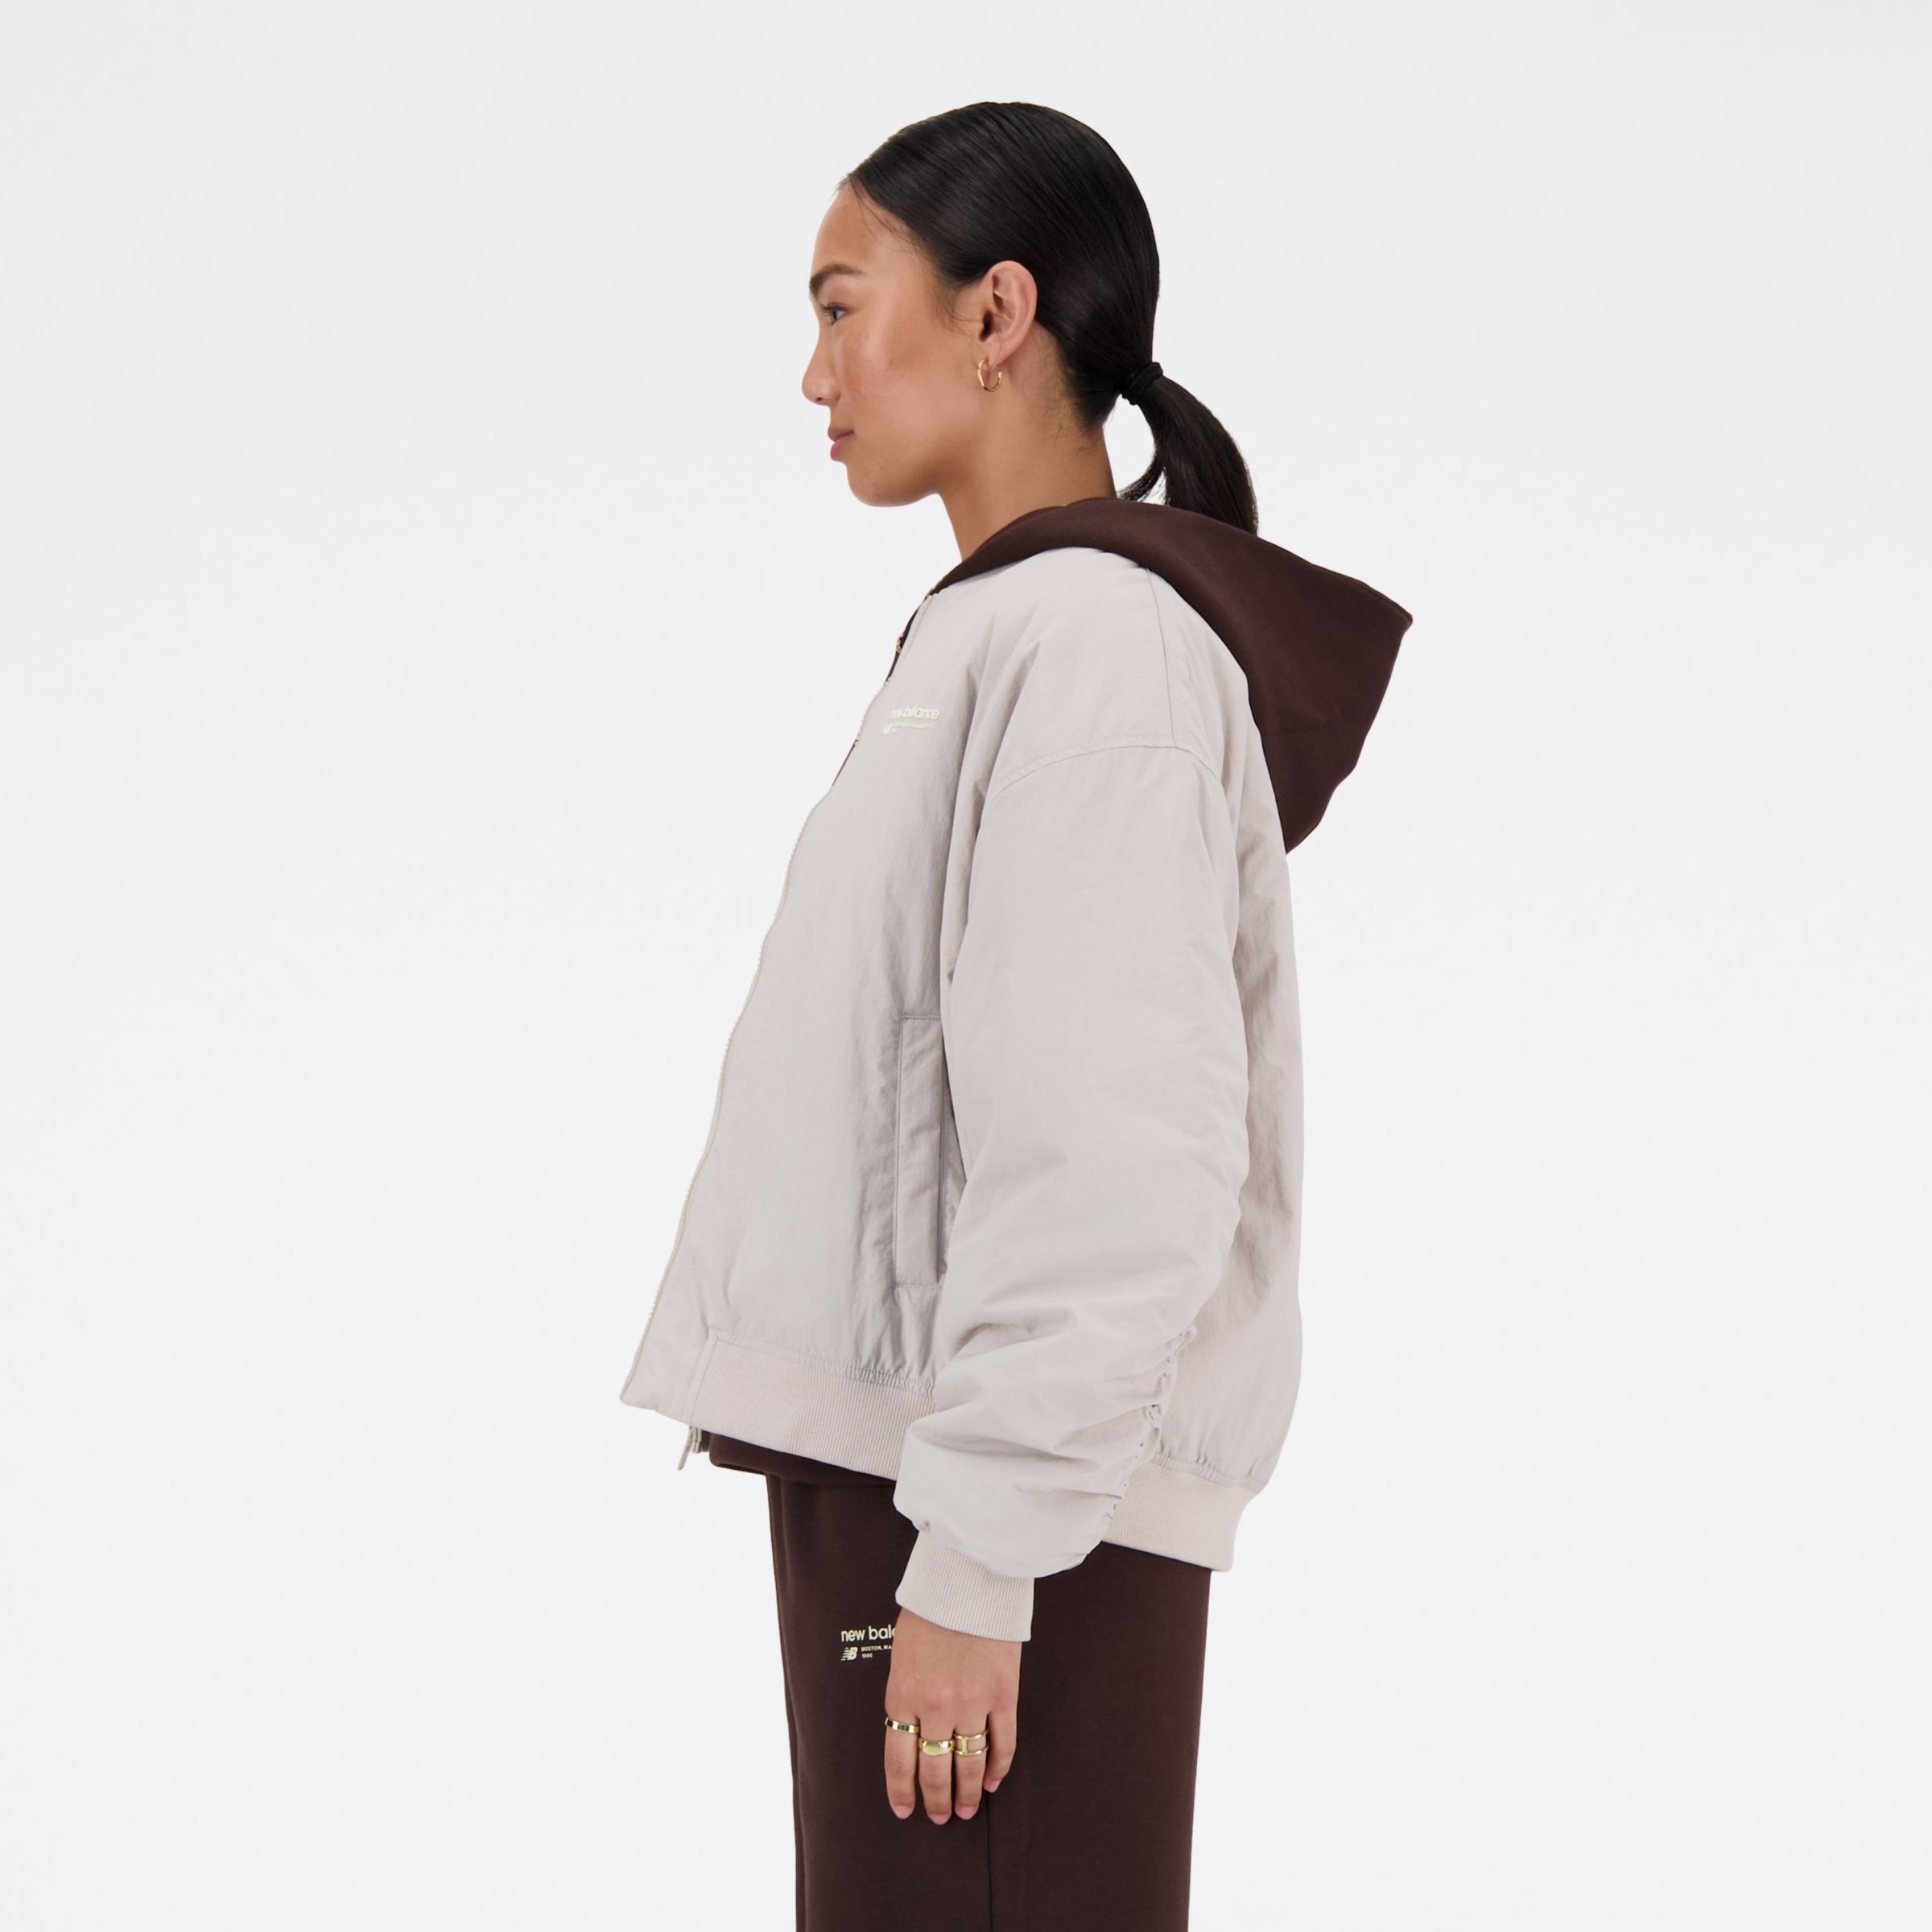 Linear Heritage Woven Bomber Jacket - 4